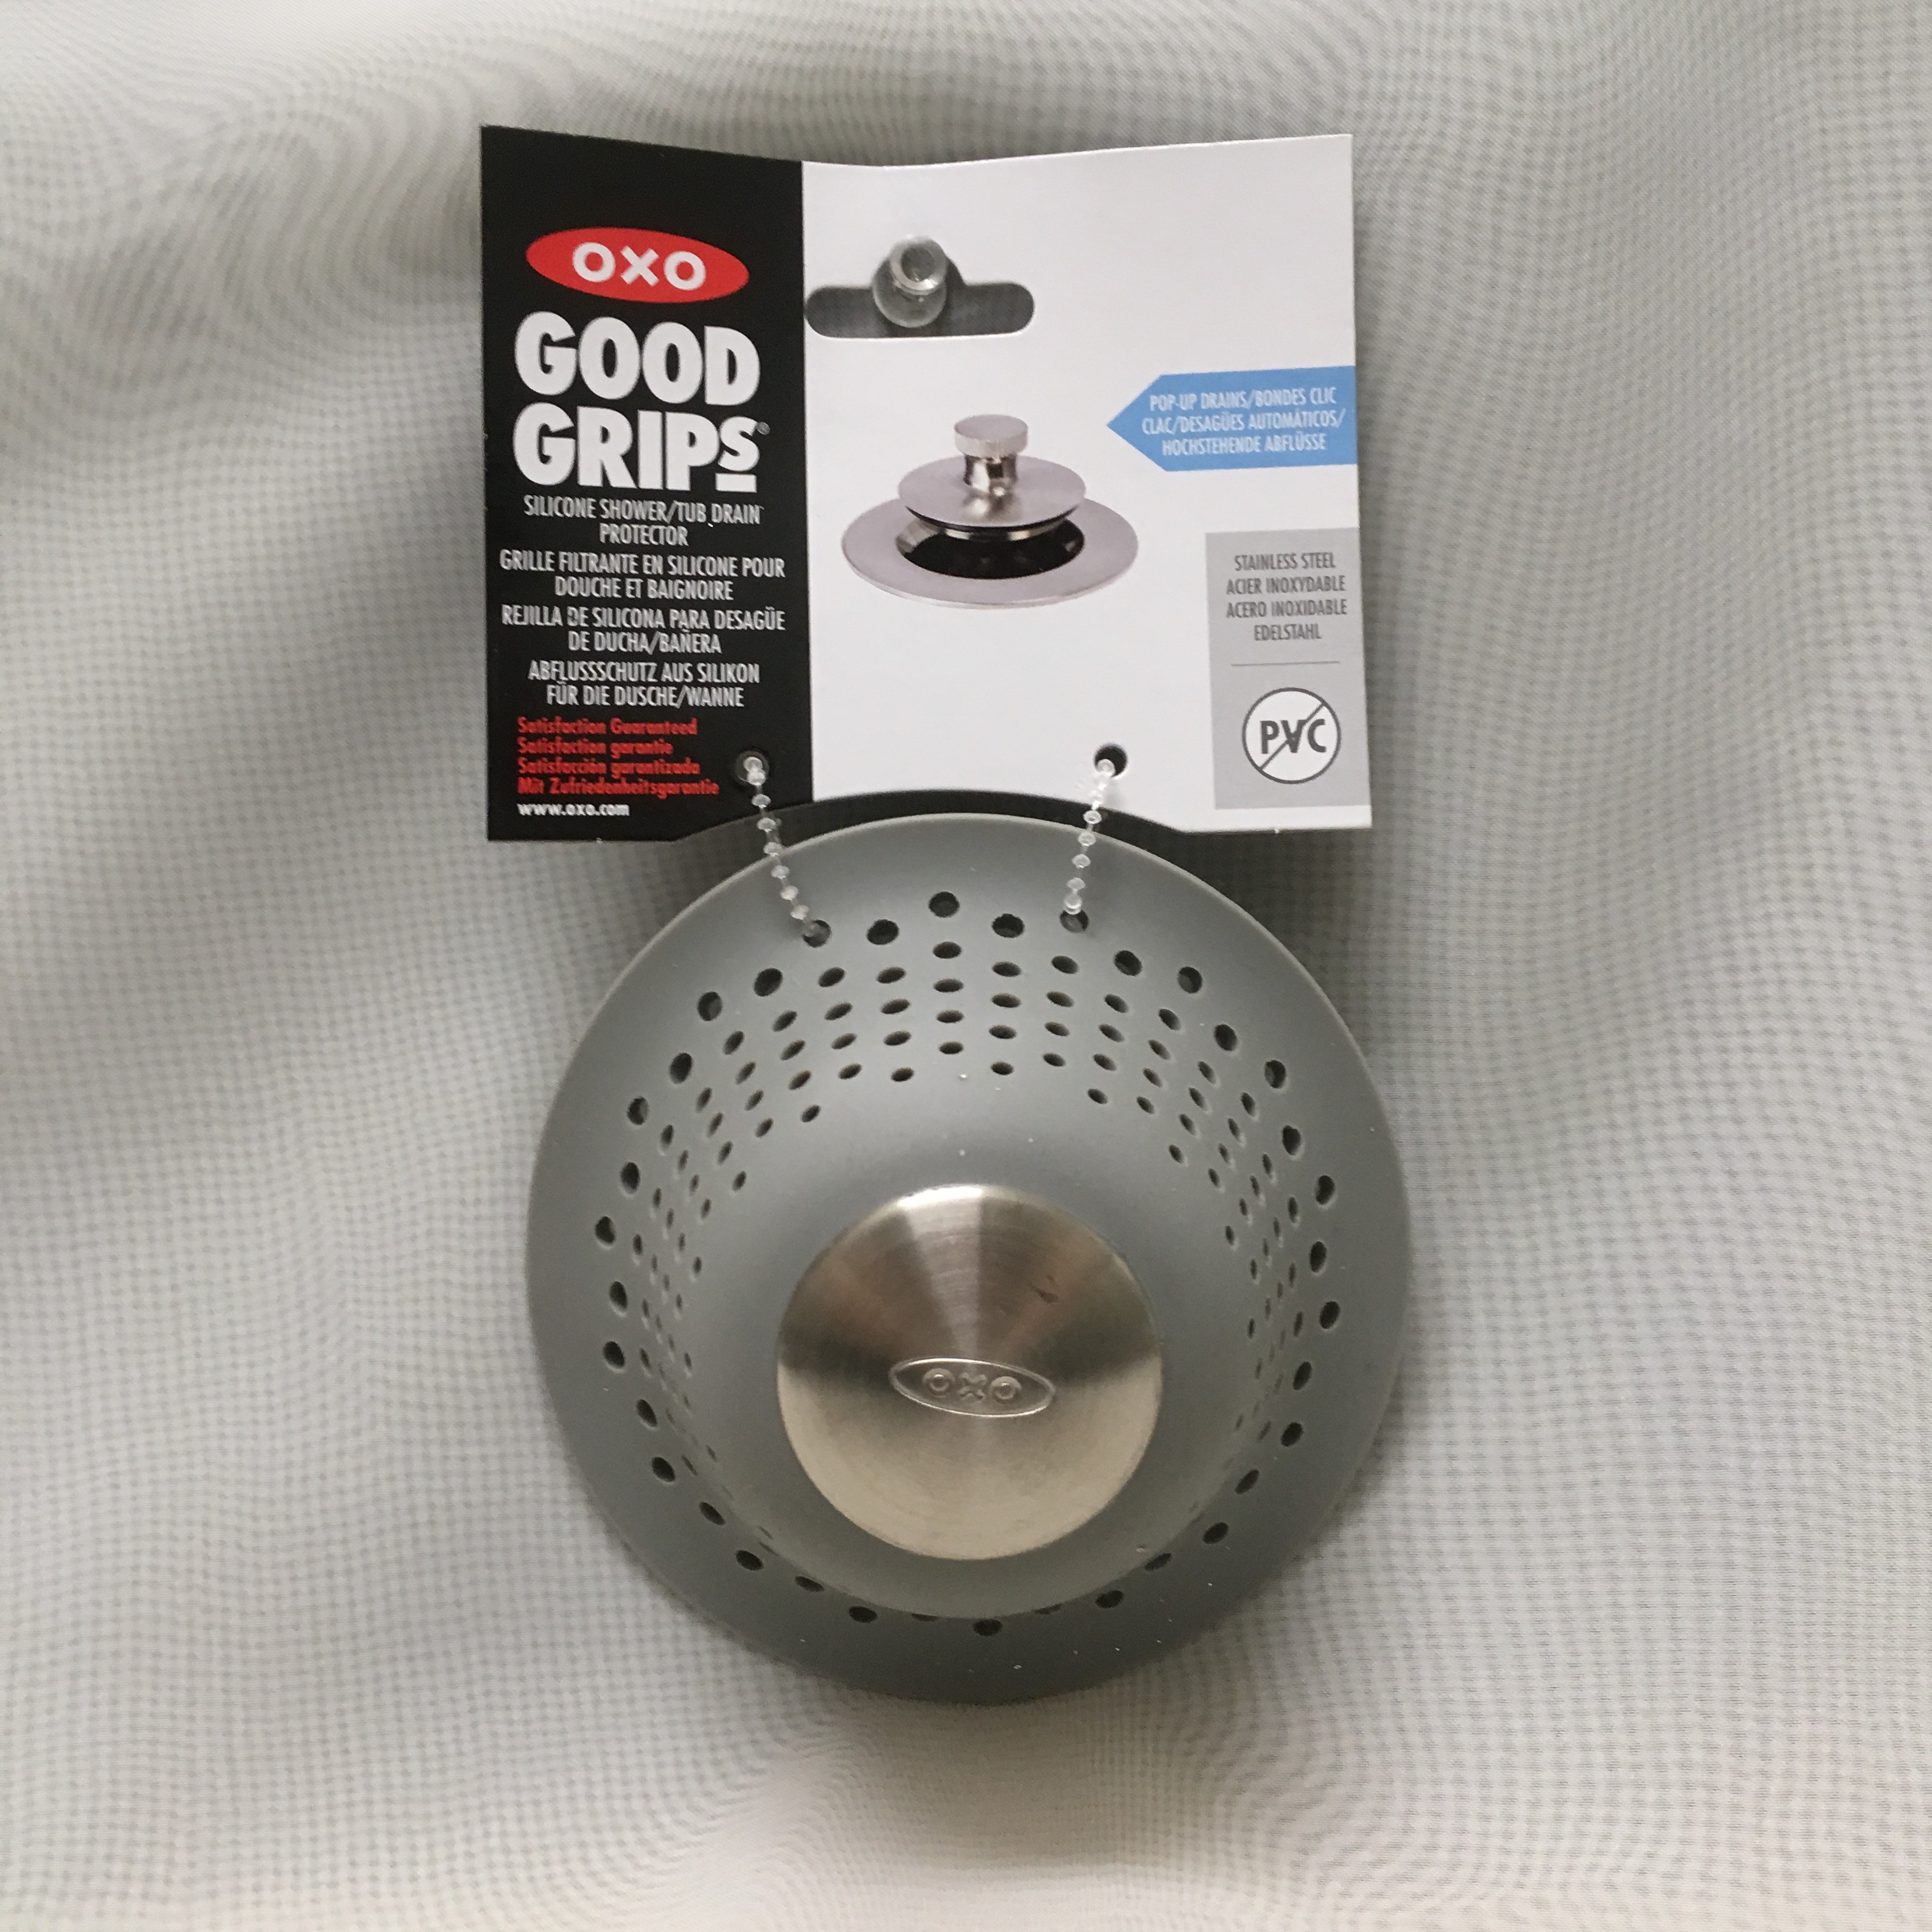 OXO Good Grips Silicone Drain Protector for Bathtub Drains Review 